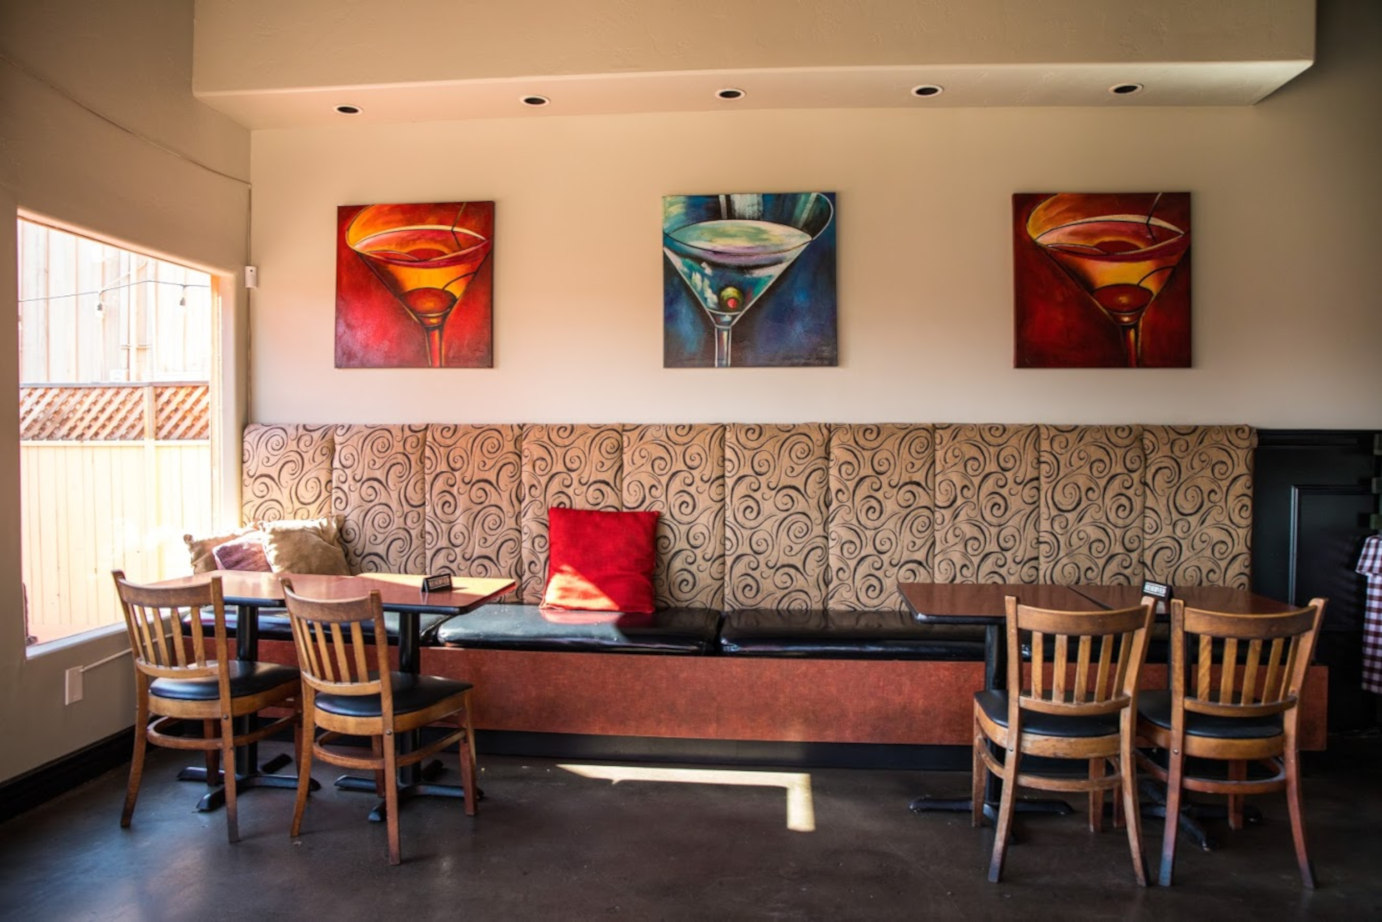 Interior, sitting area, martini images on the wall